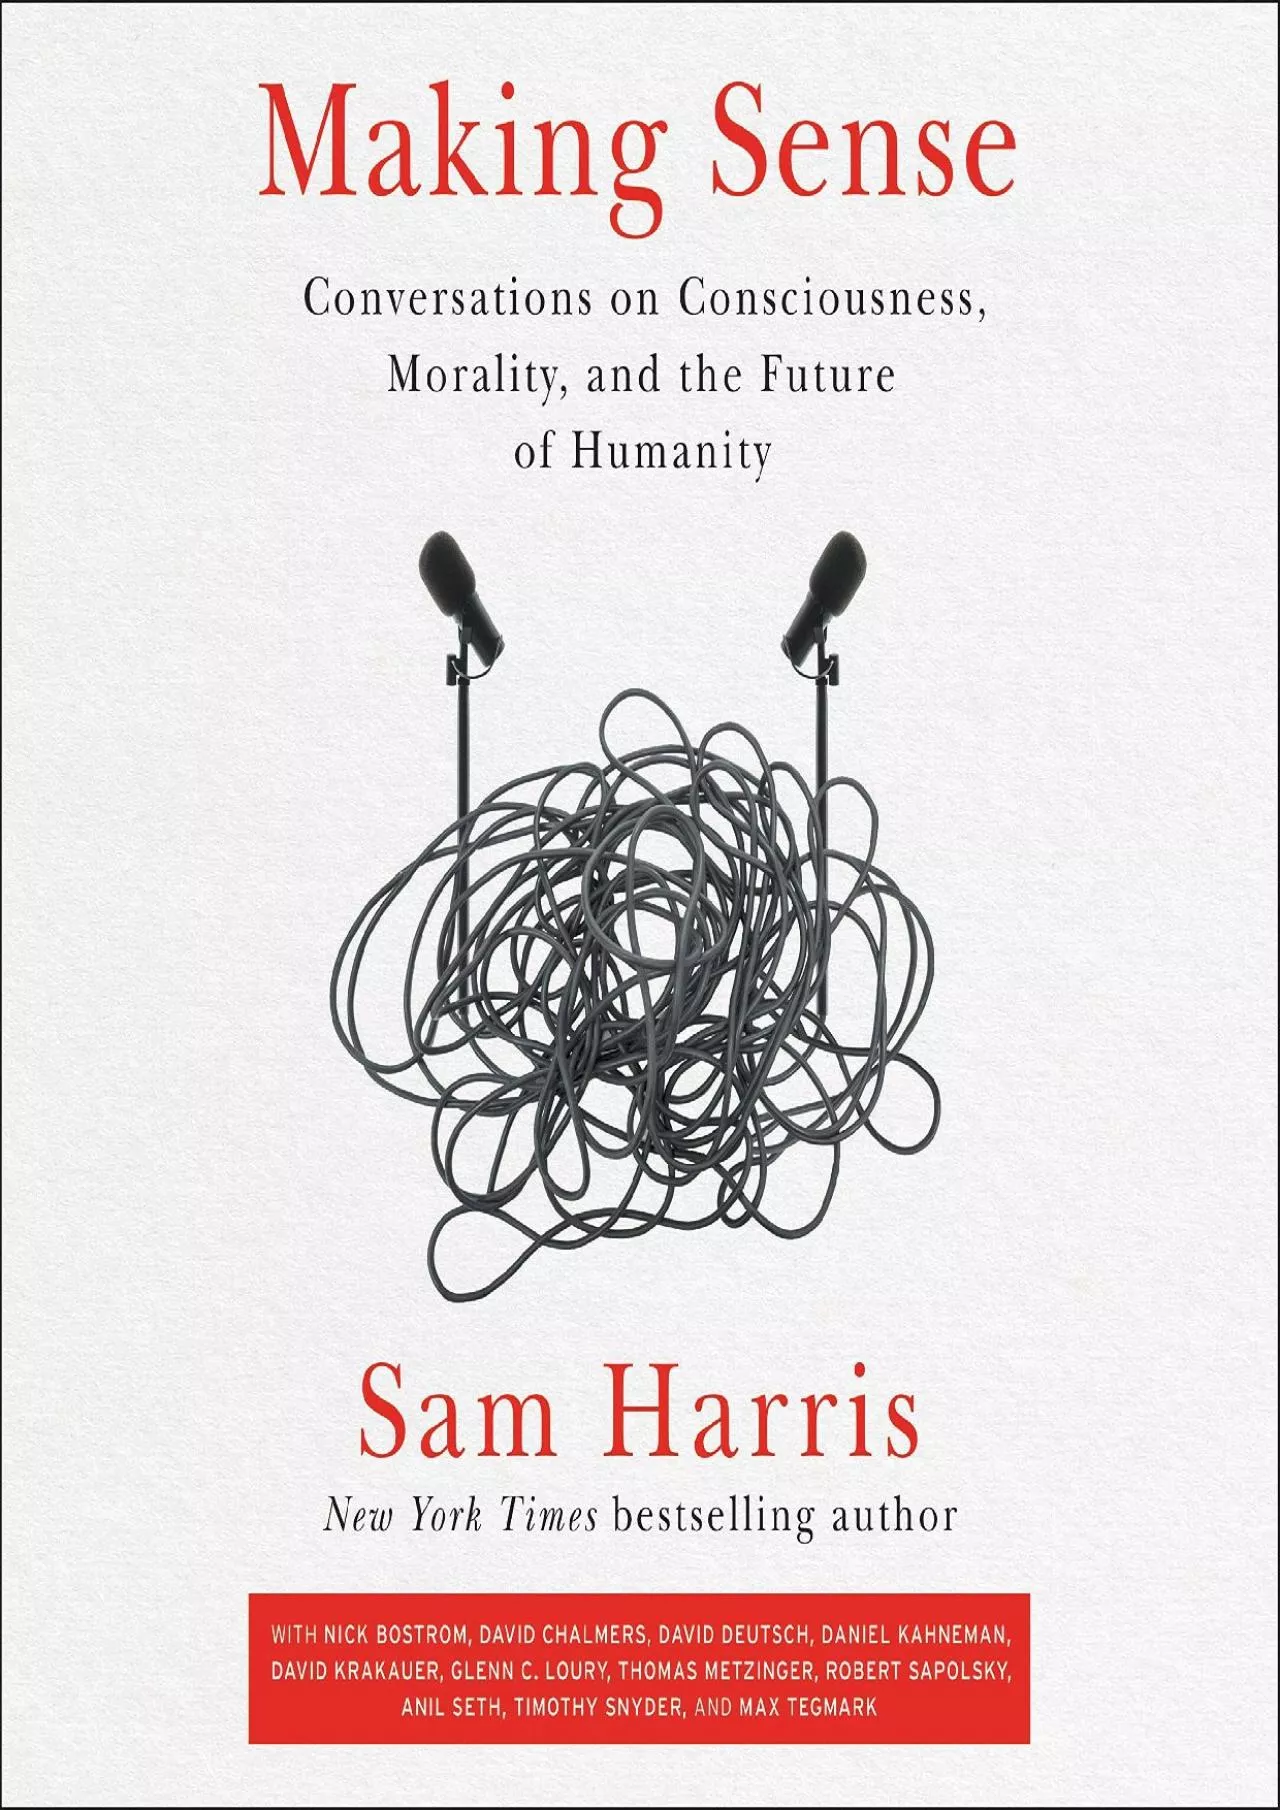 (BOOS)-Making Sense: Conversations on Consciousness, Morality, and the Future of Humanity